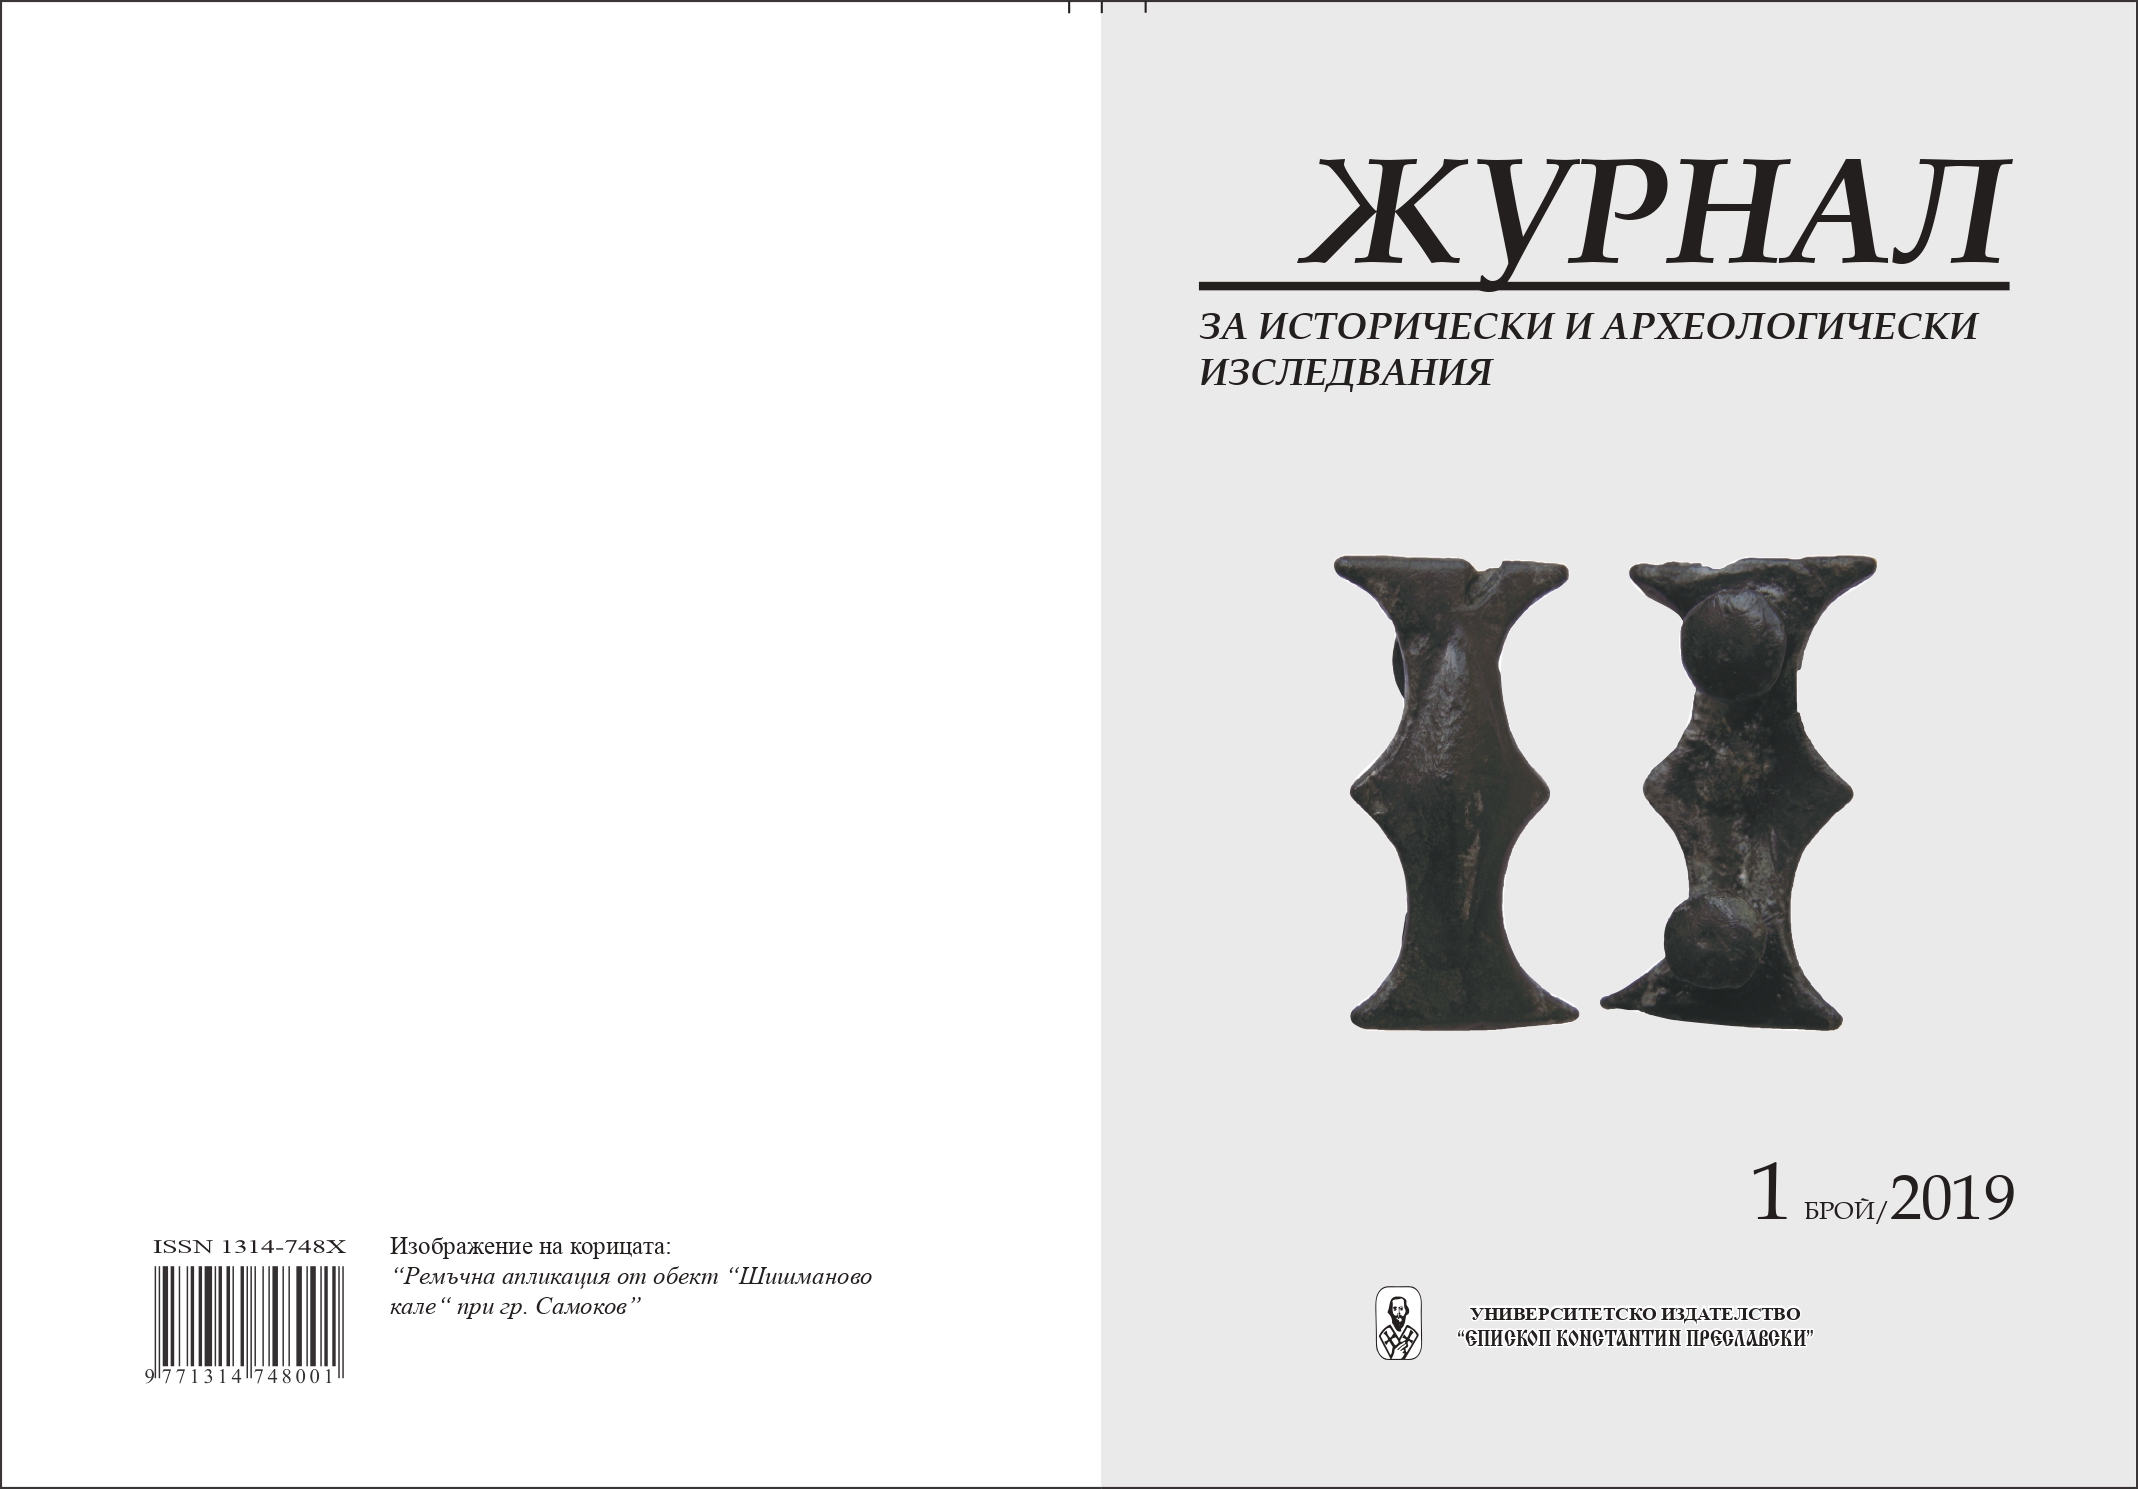 Metric Parameters and Denominations of Serdica’s
Provincial Coins Cover Image